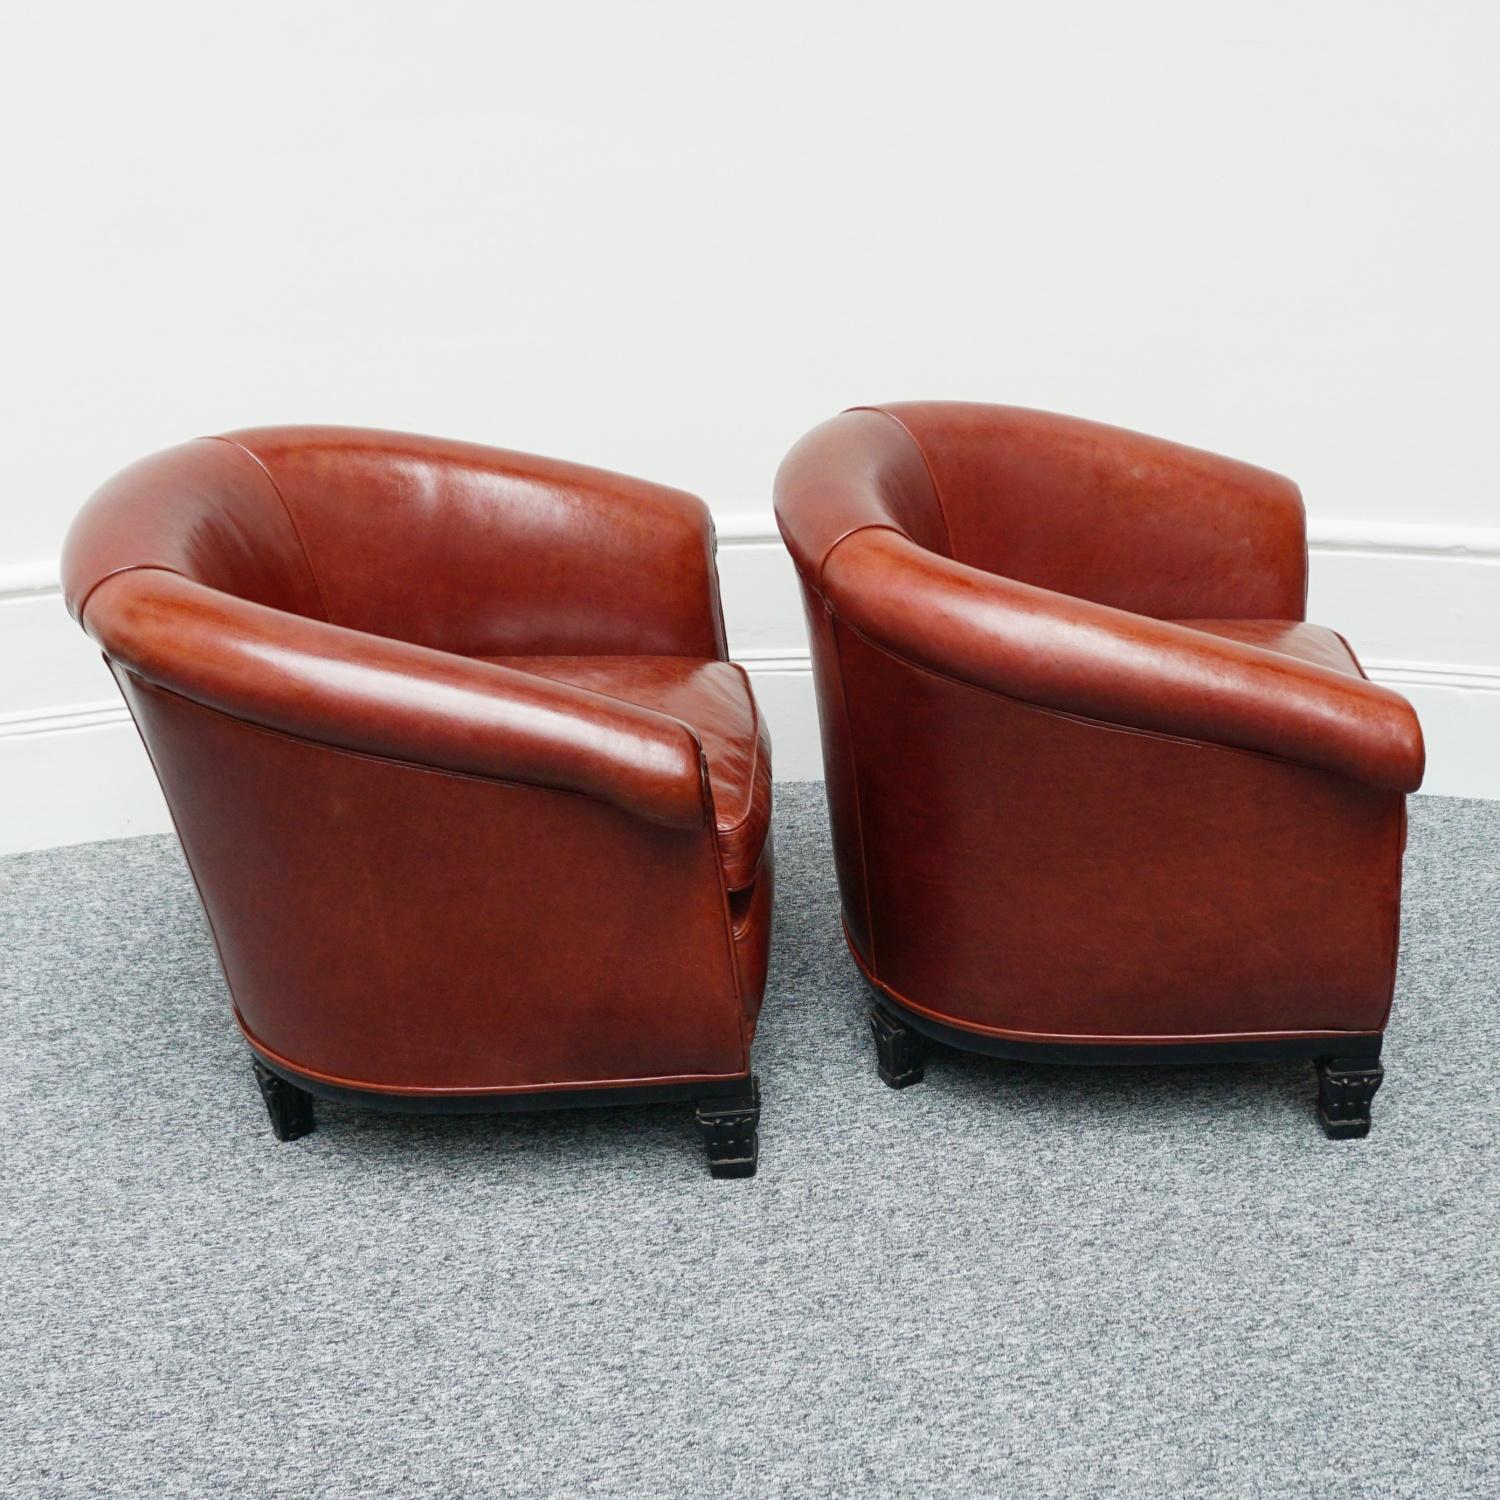 Pair of French Art Deco Club Chairs Re-Upholstered in Chestnut Leather 3